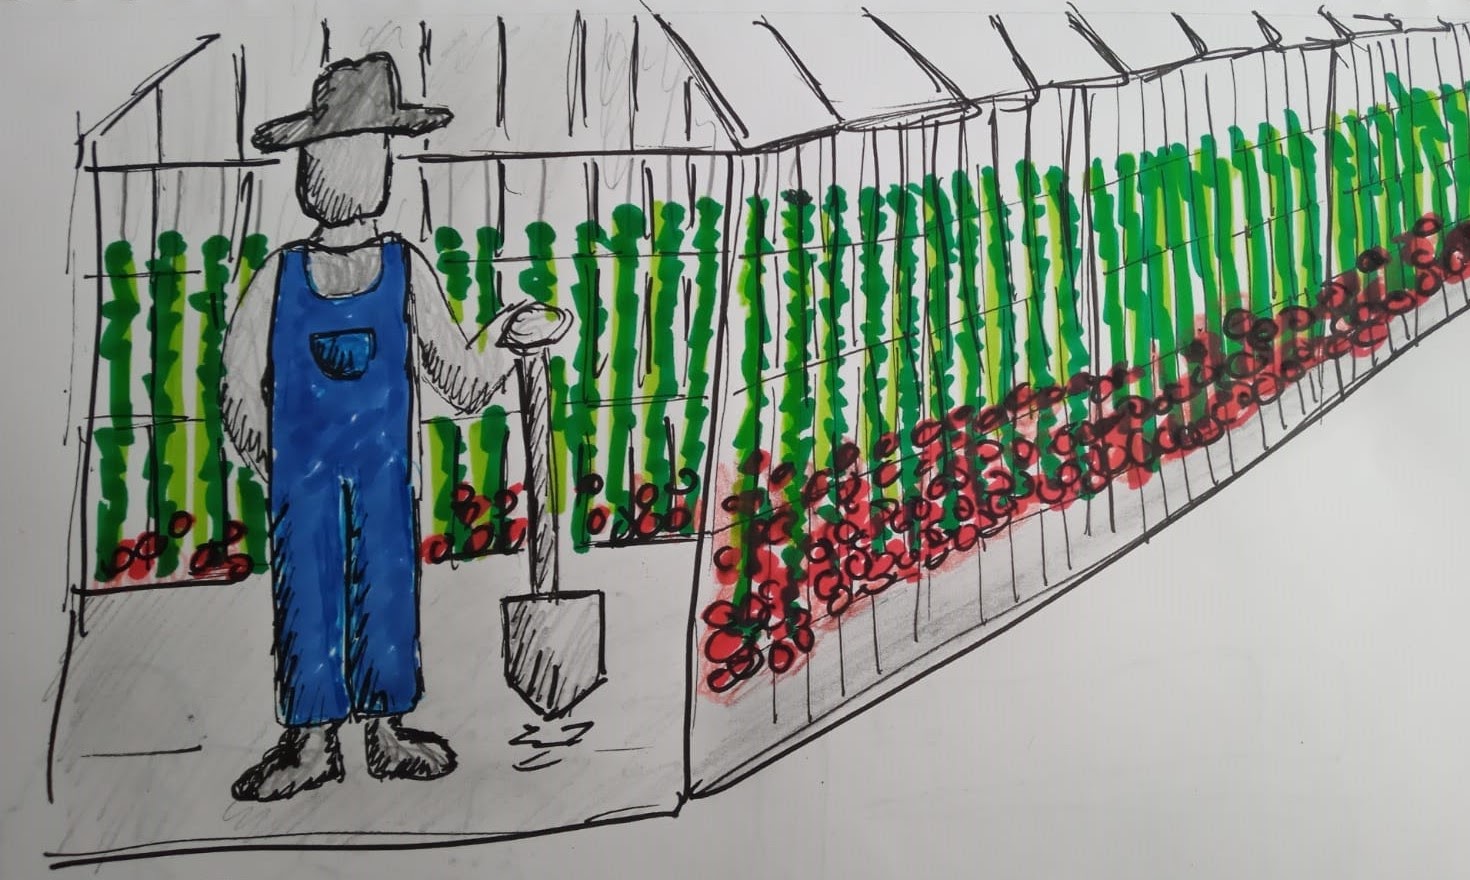 Hand drawn sketch of farmer in front of greenhouse